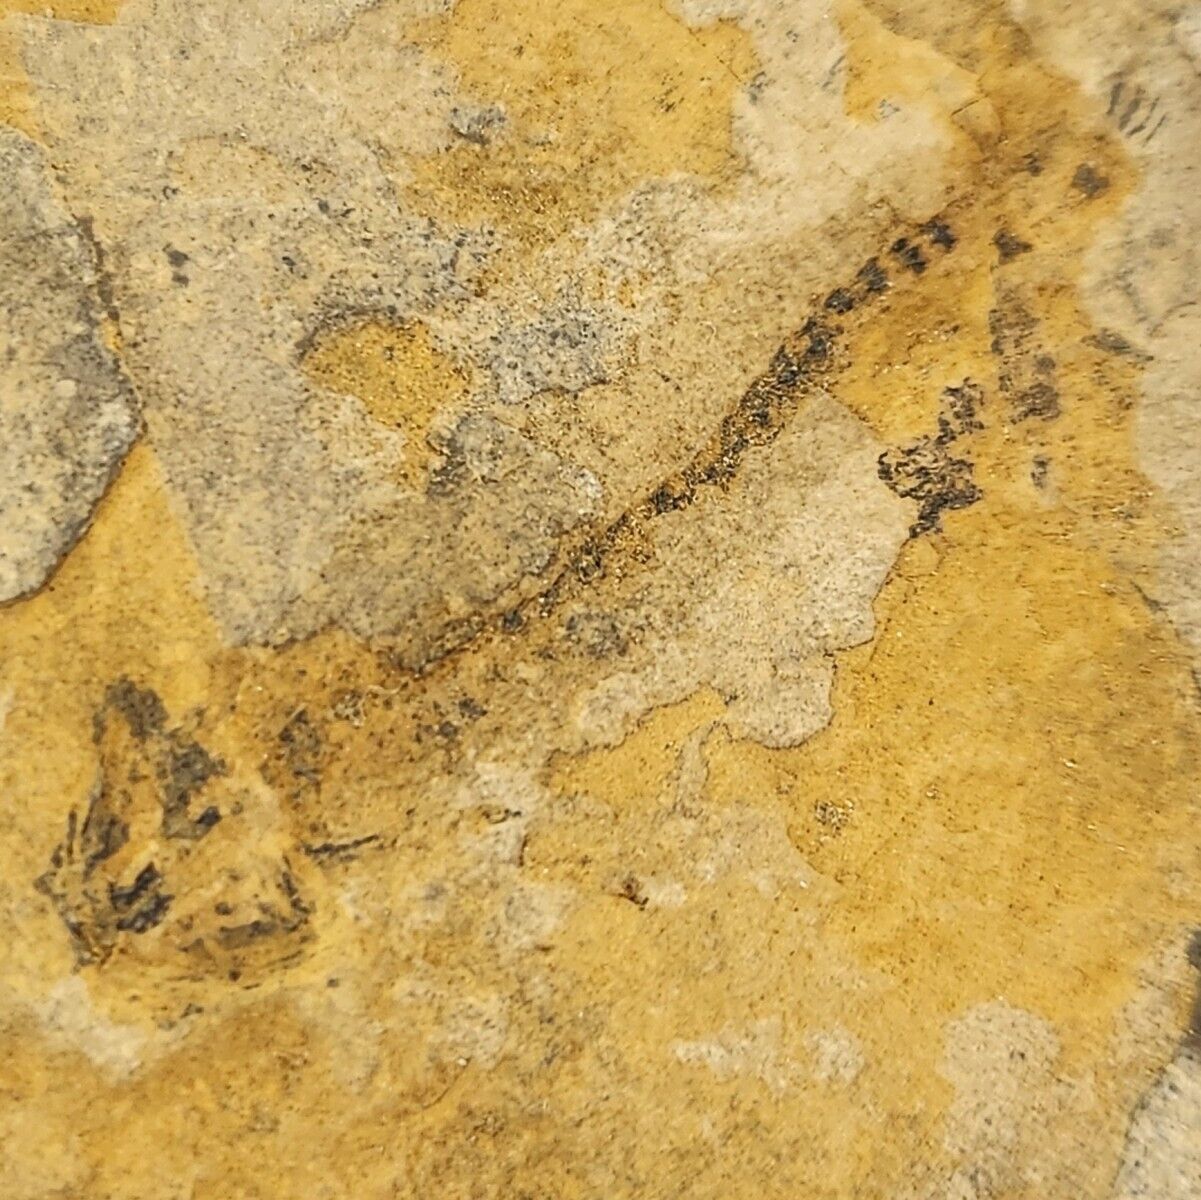 Apateon Fossil Amphibian in Plate - Germany 